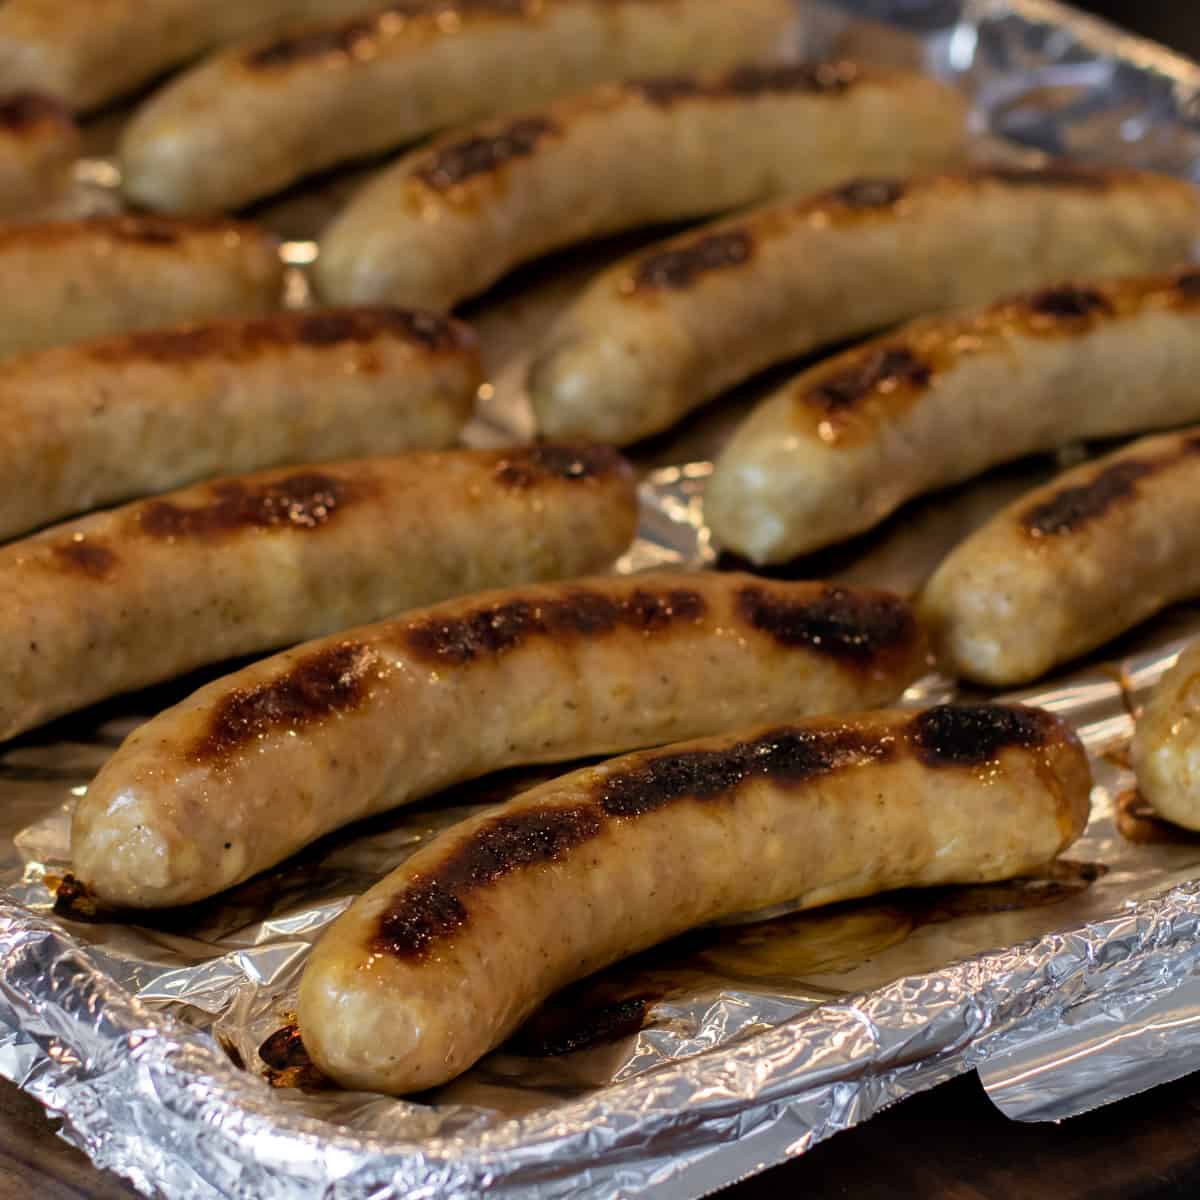 Cooked sausages on a baking sheet.